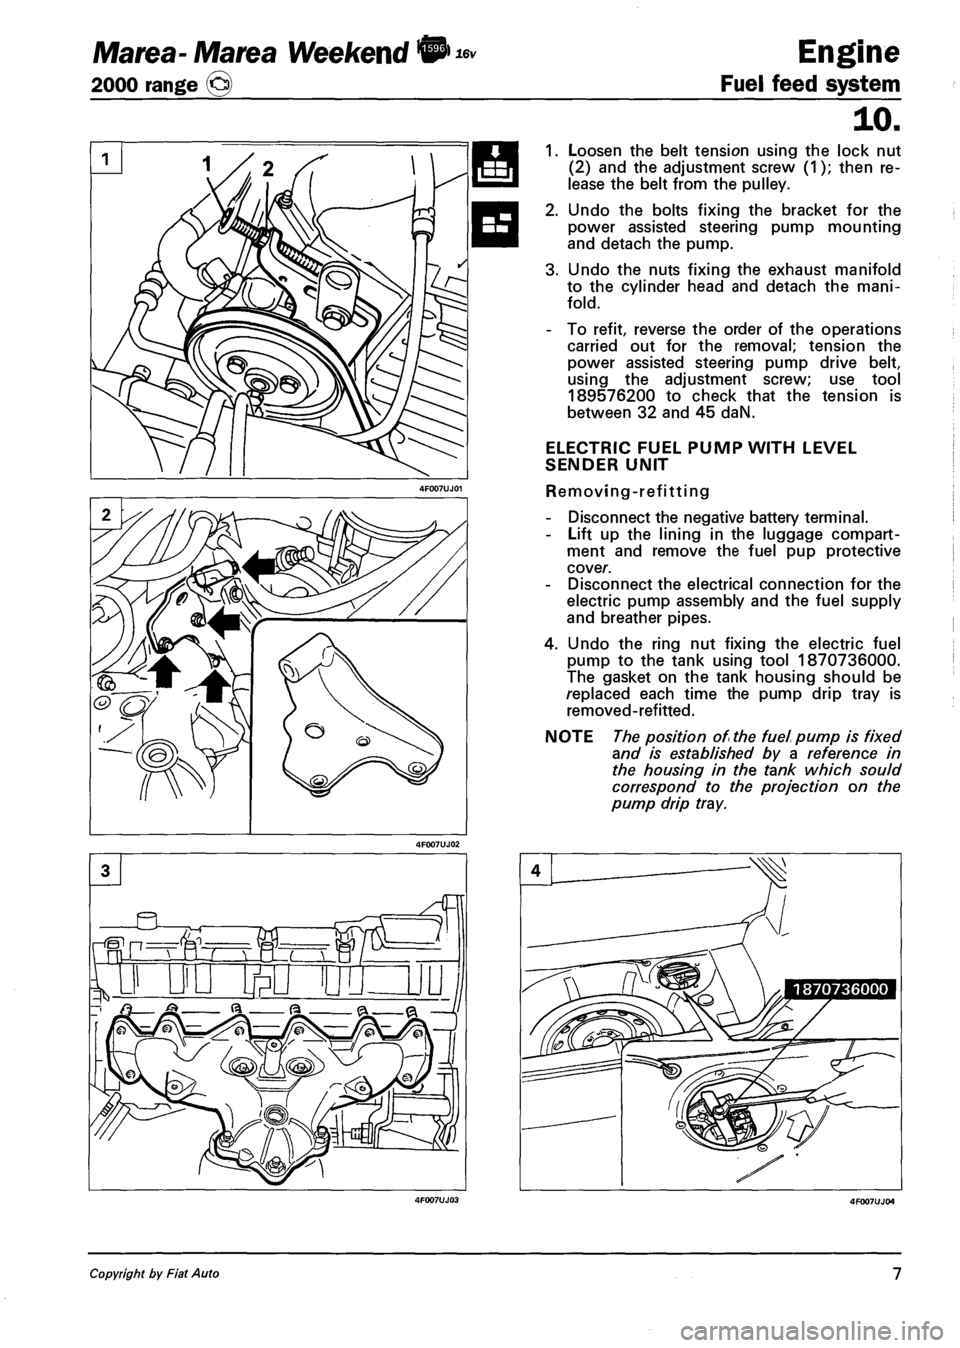 FIAT MAREA 2000 1.G User Guide Marea- Marea Weekend • 
2000 range © 
16v Engine 
Fuel feed system 
10. 
1. Loosen the belt tension using the lock nut 
(2) and the adjustment screw (1); then re­
lease the belt from the pulley. 
